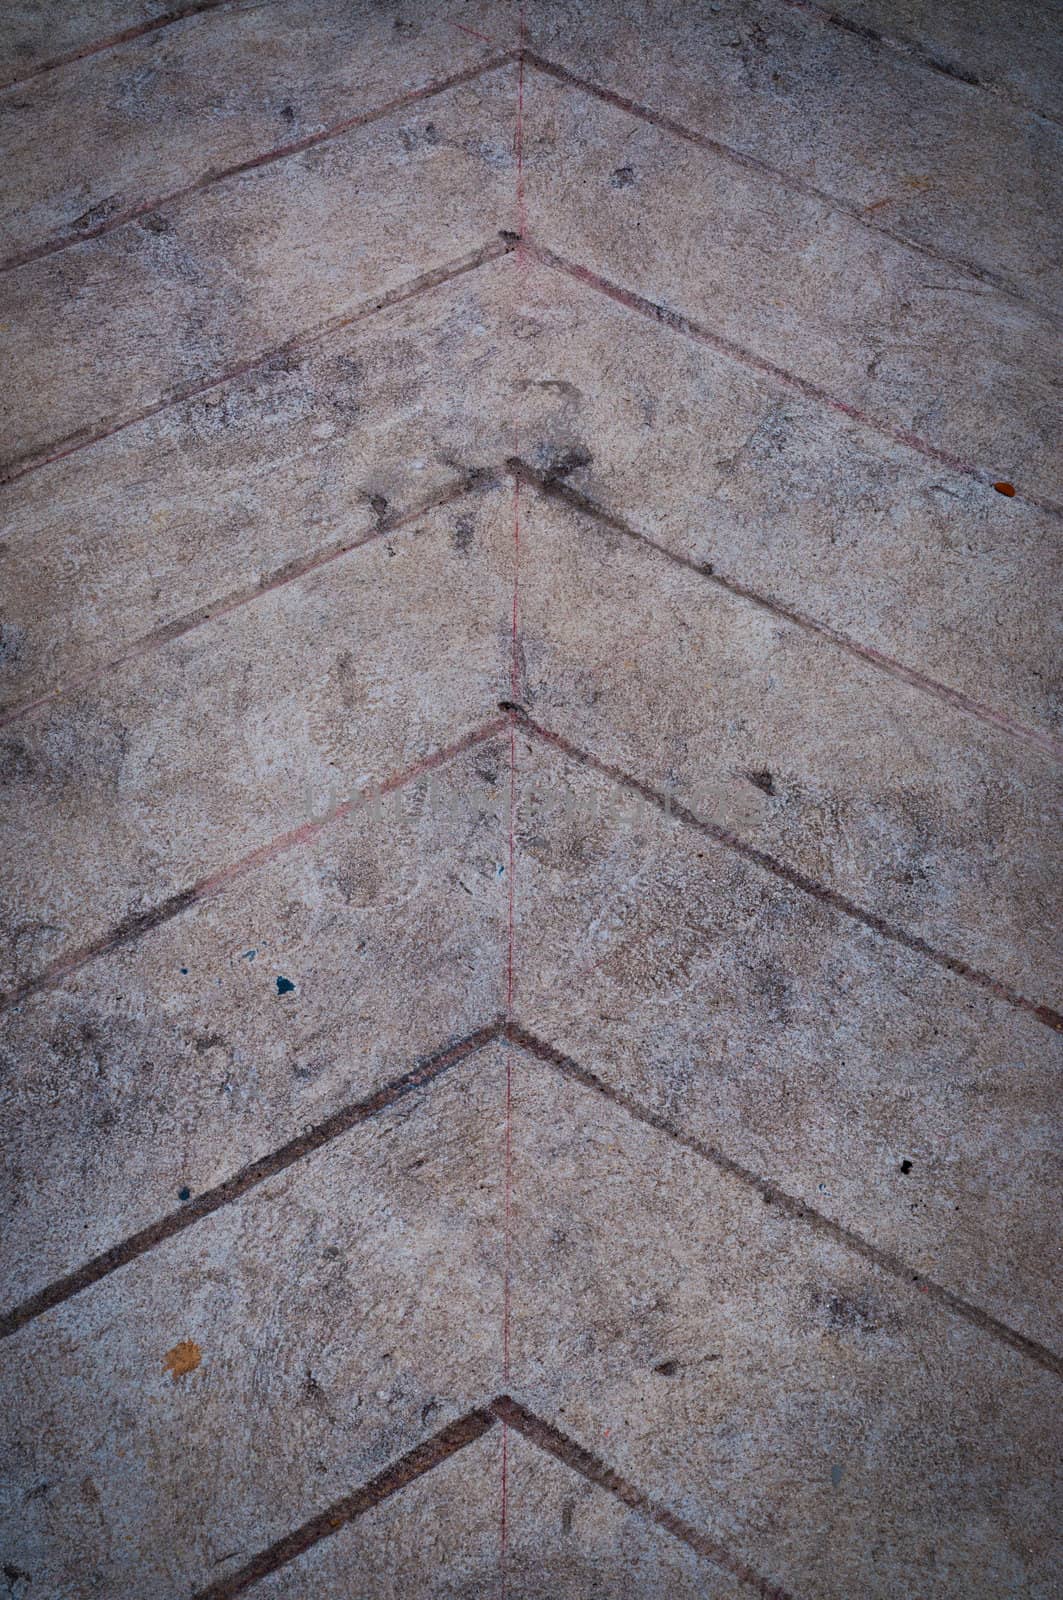 This is a arrow on the ground